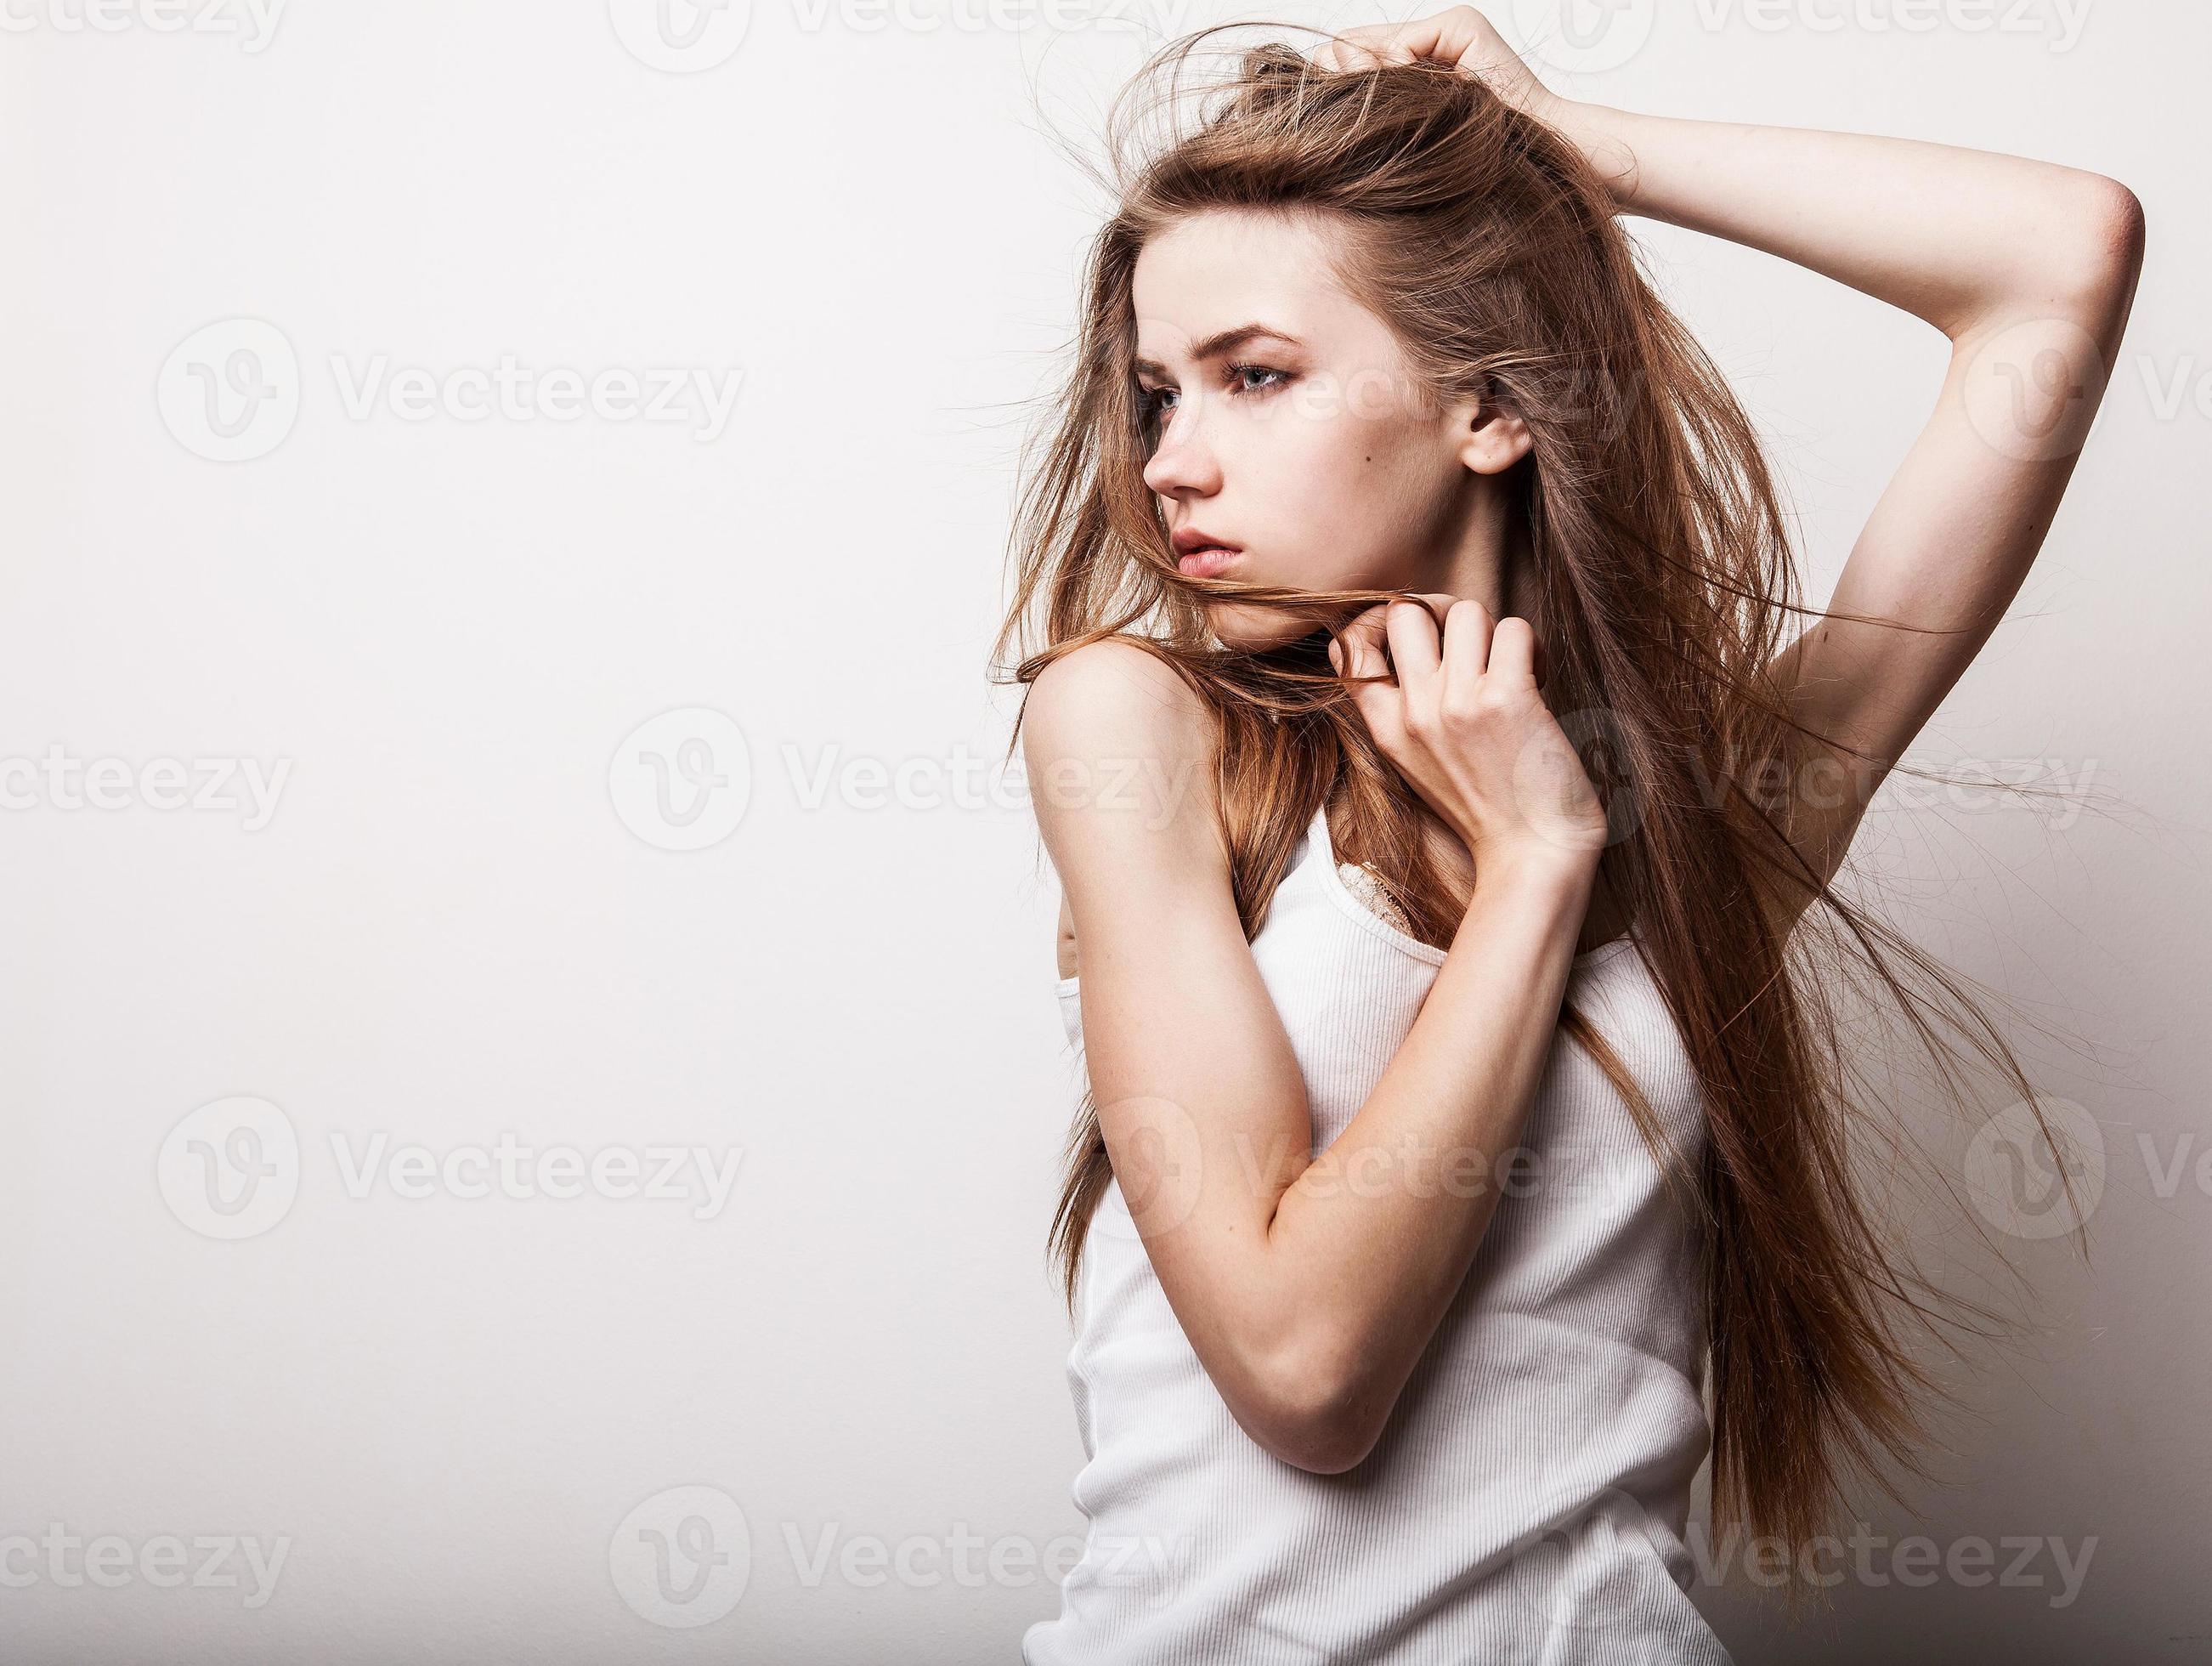 Young Sensual Girl Pose In 1064471 Stock Photo At Vecteezy, 54% OFF